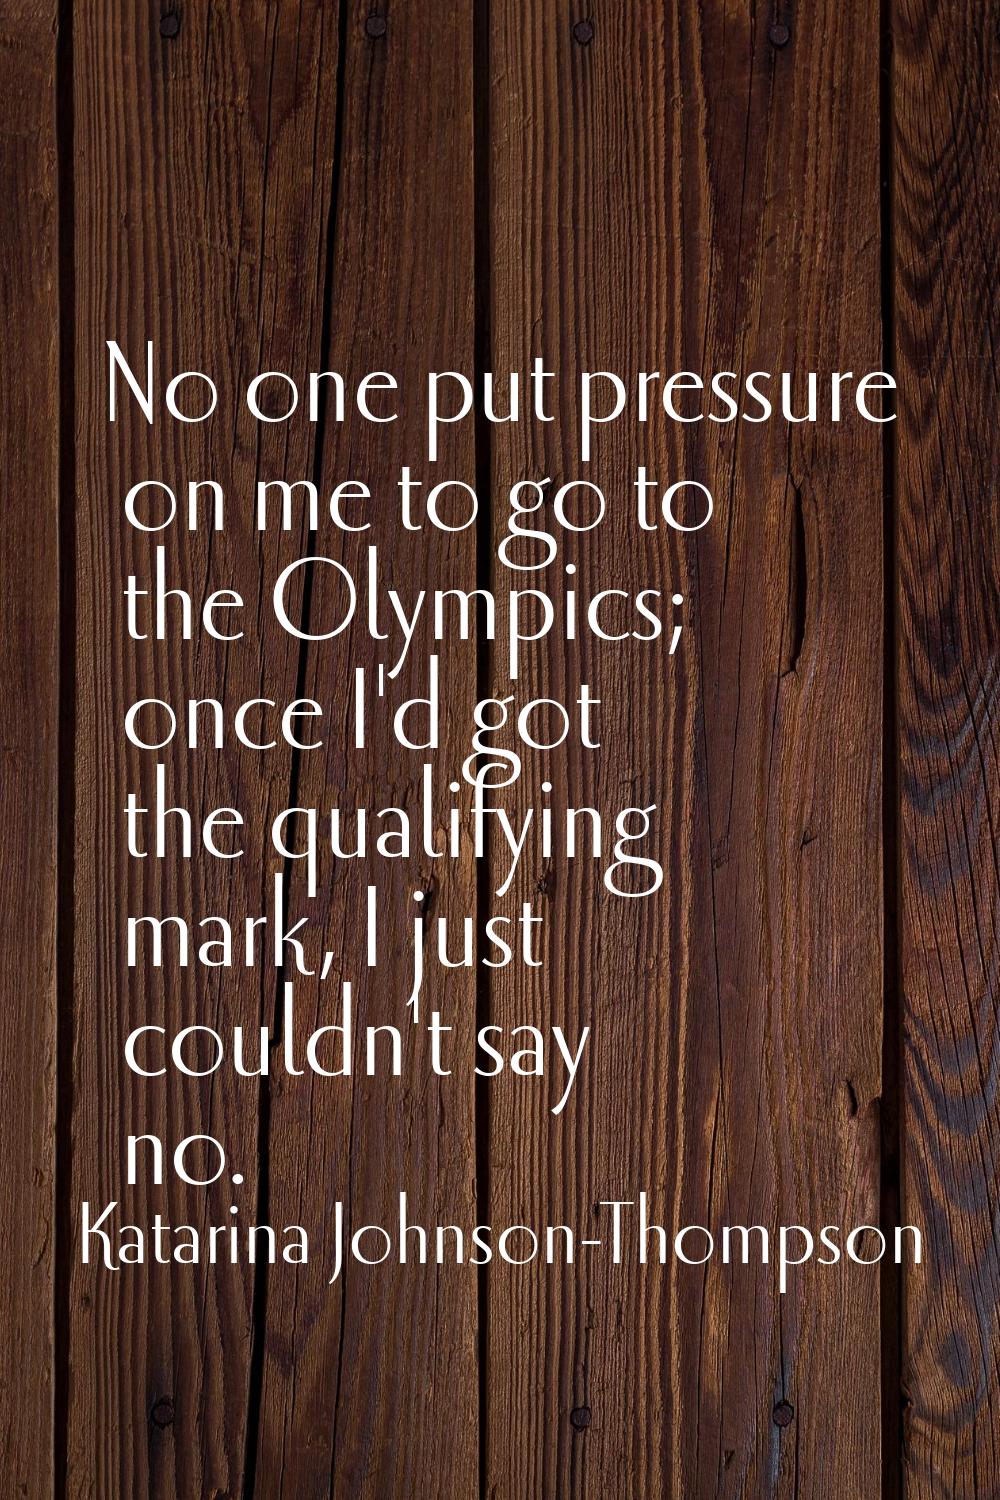 No one put pressure on me to go to the Olympics; once I'd got the qualifying mark, I just couldn't 